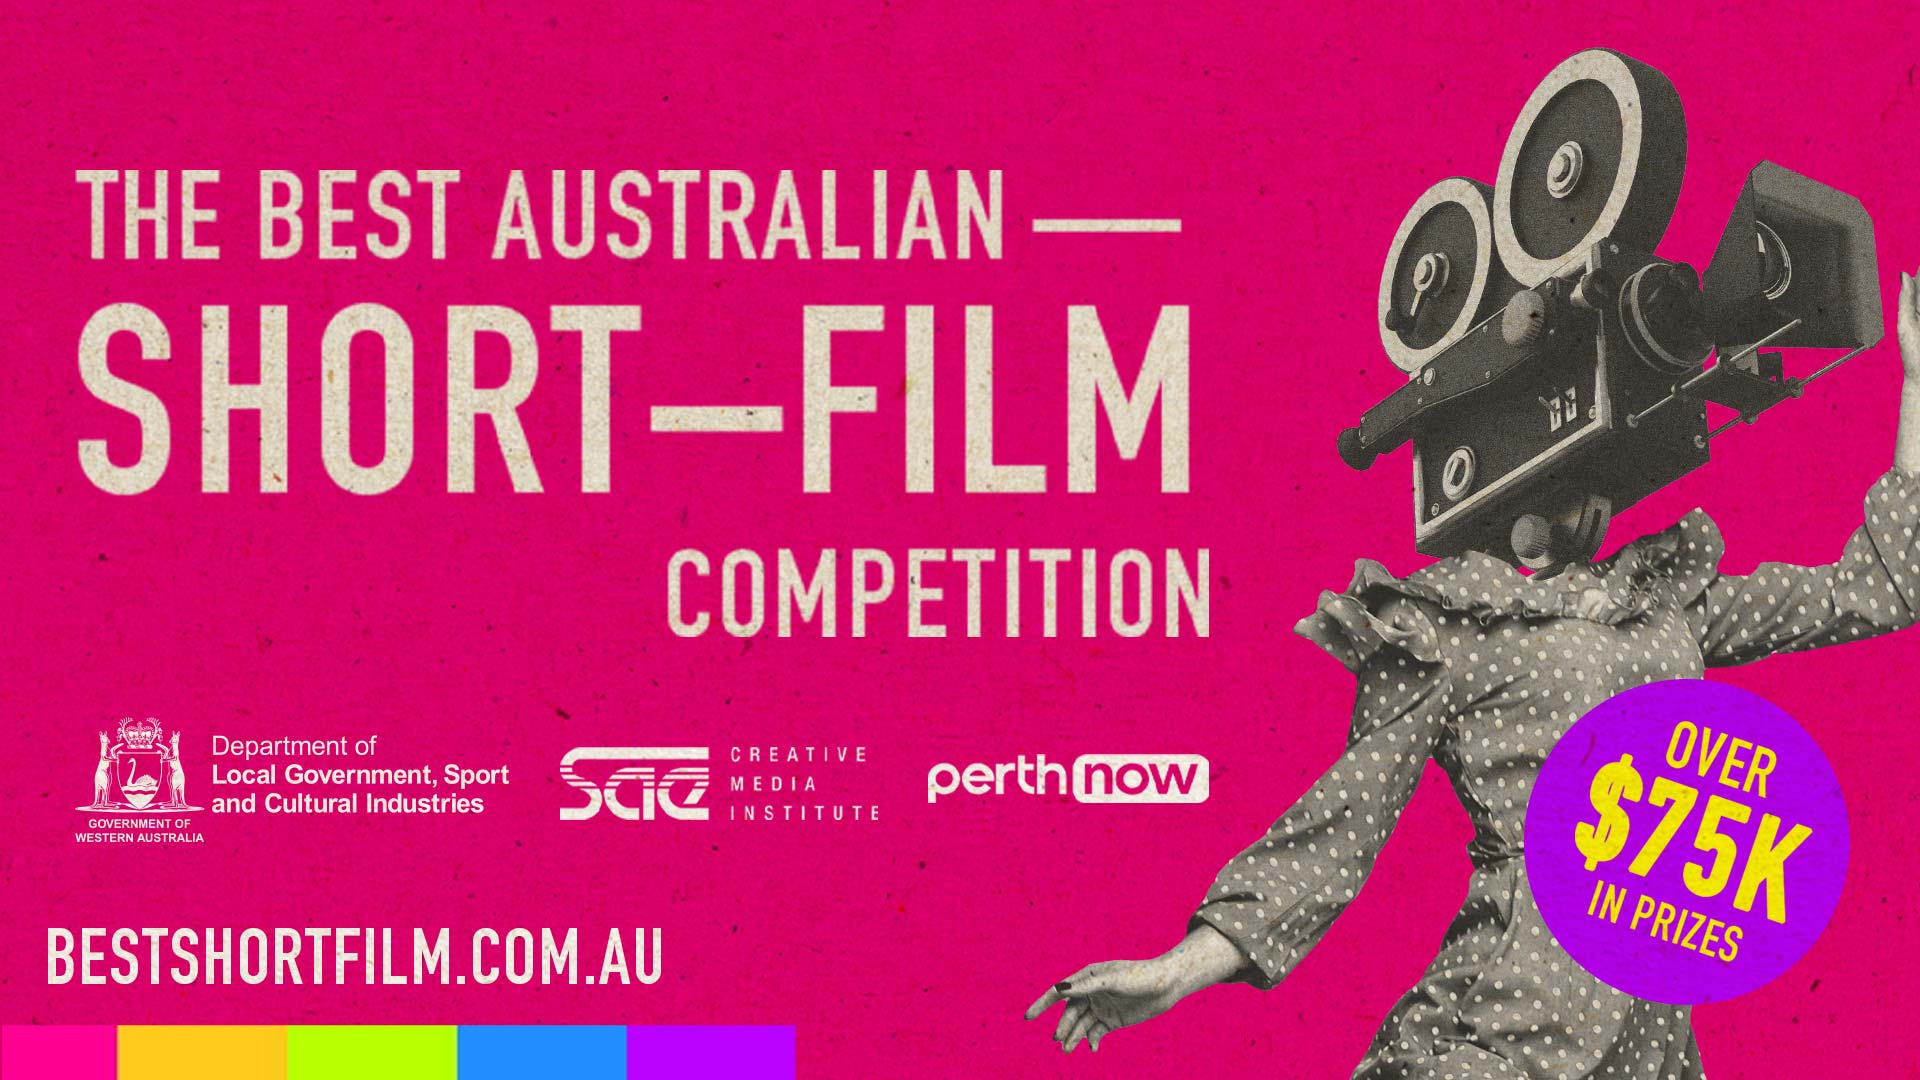 A promotional banner for The Best Australian Short-Film competition